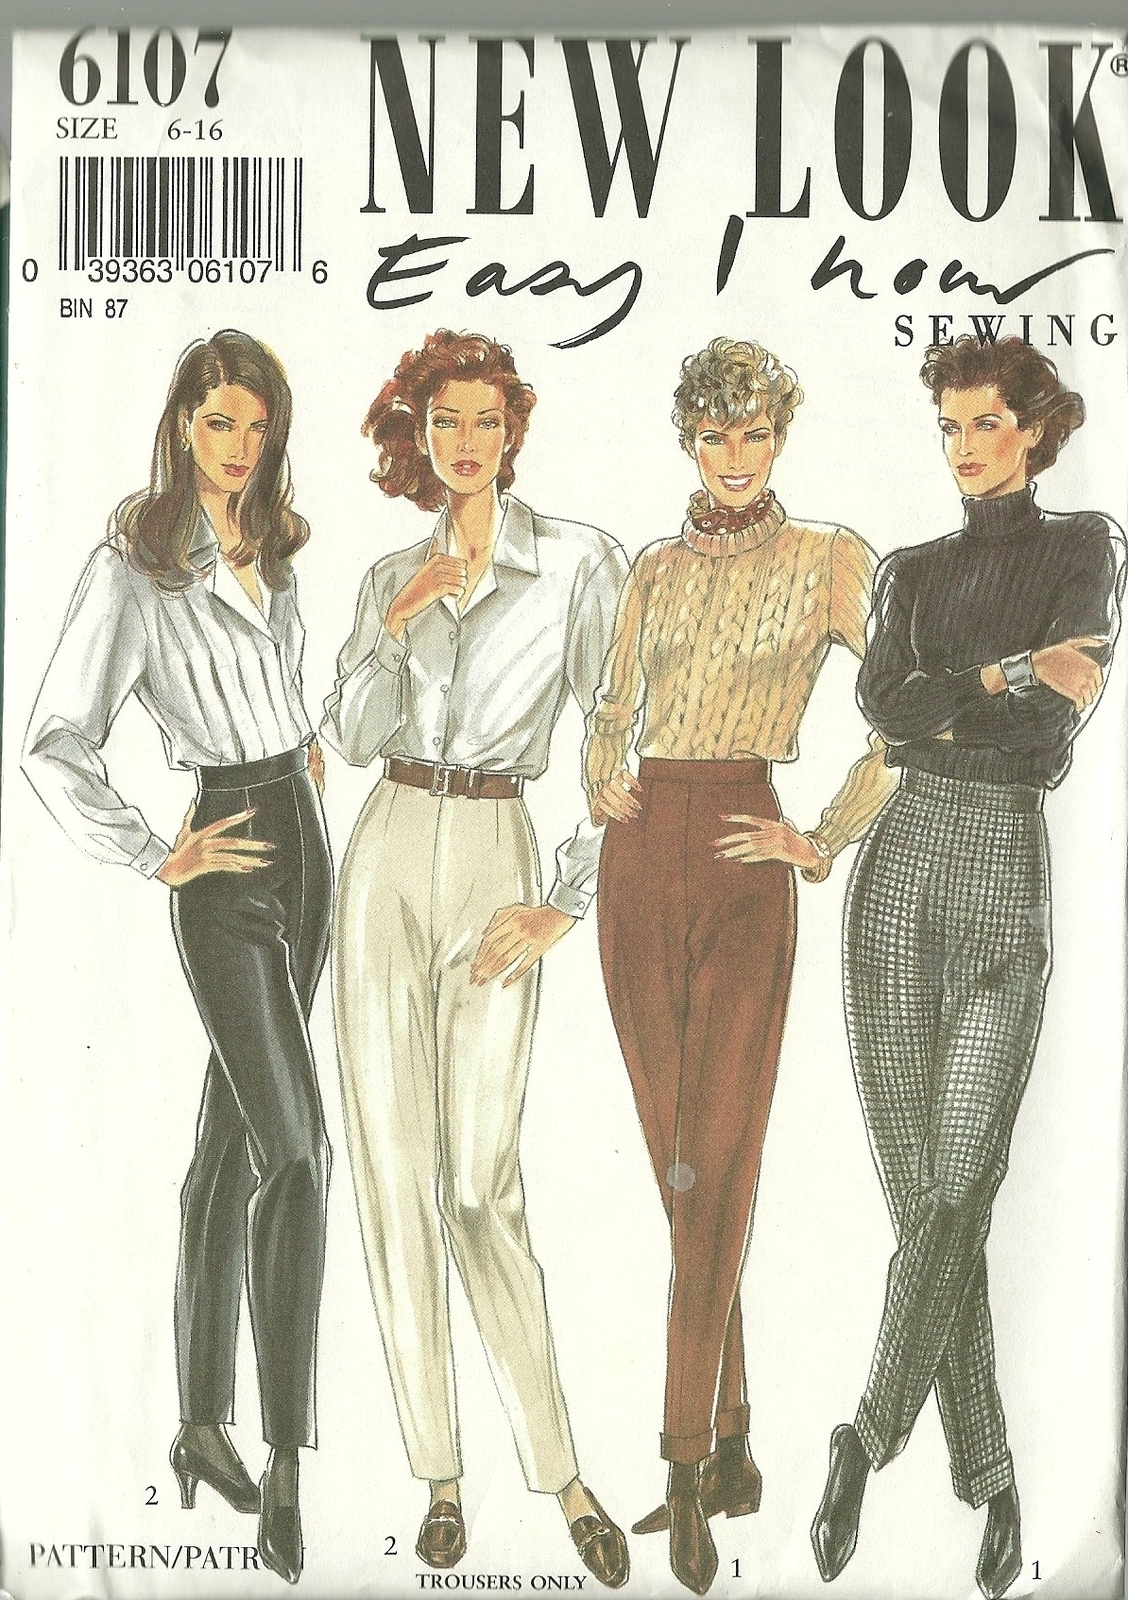 New Look Sewing Pattern 6107 Misses Womens Pants Size 6 8 10 12 14 16 New - £5.50 GBP